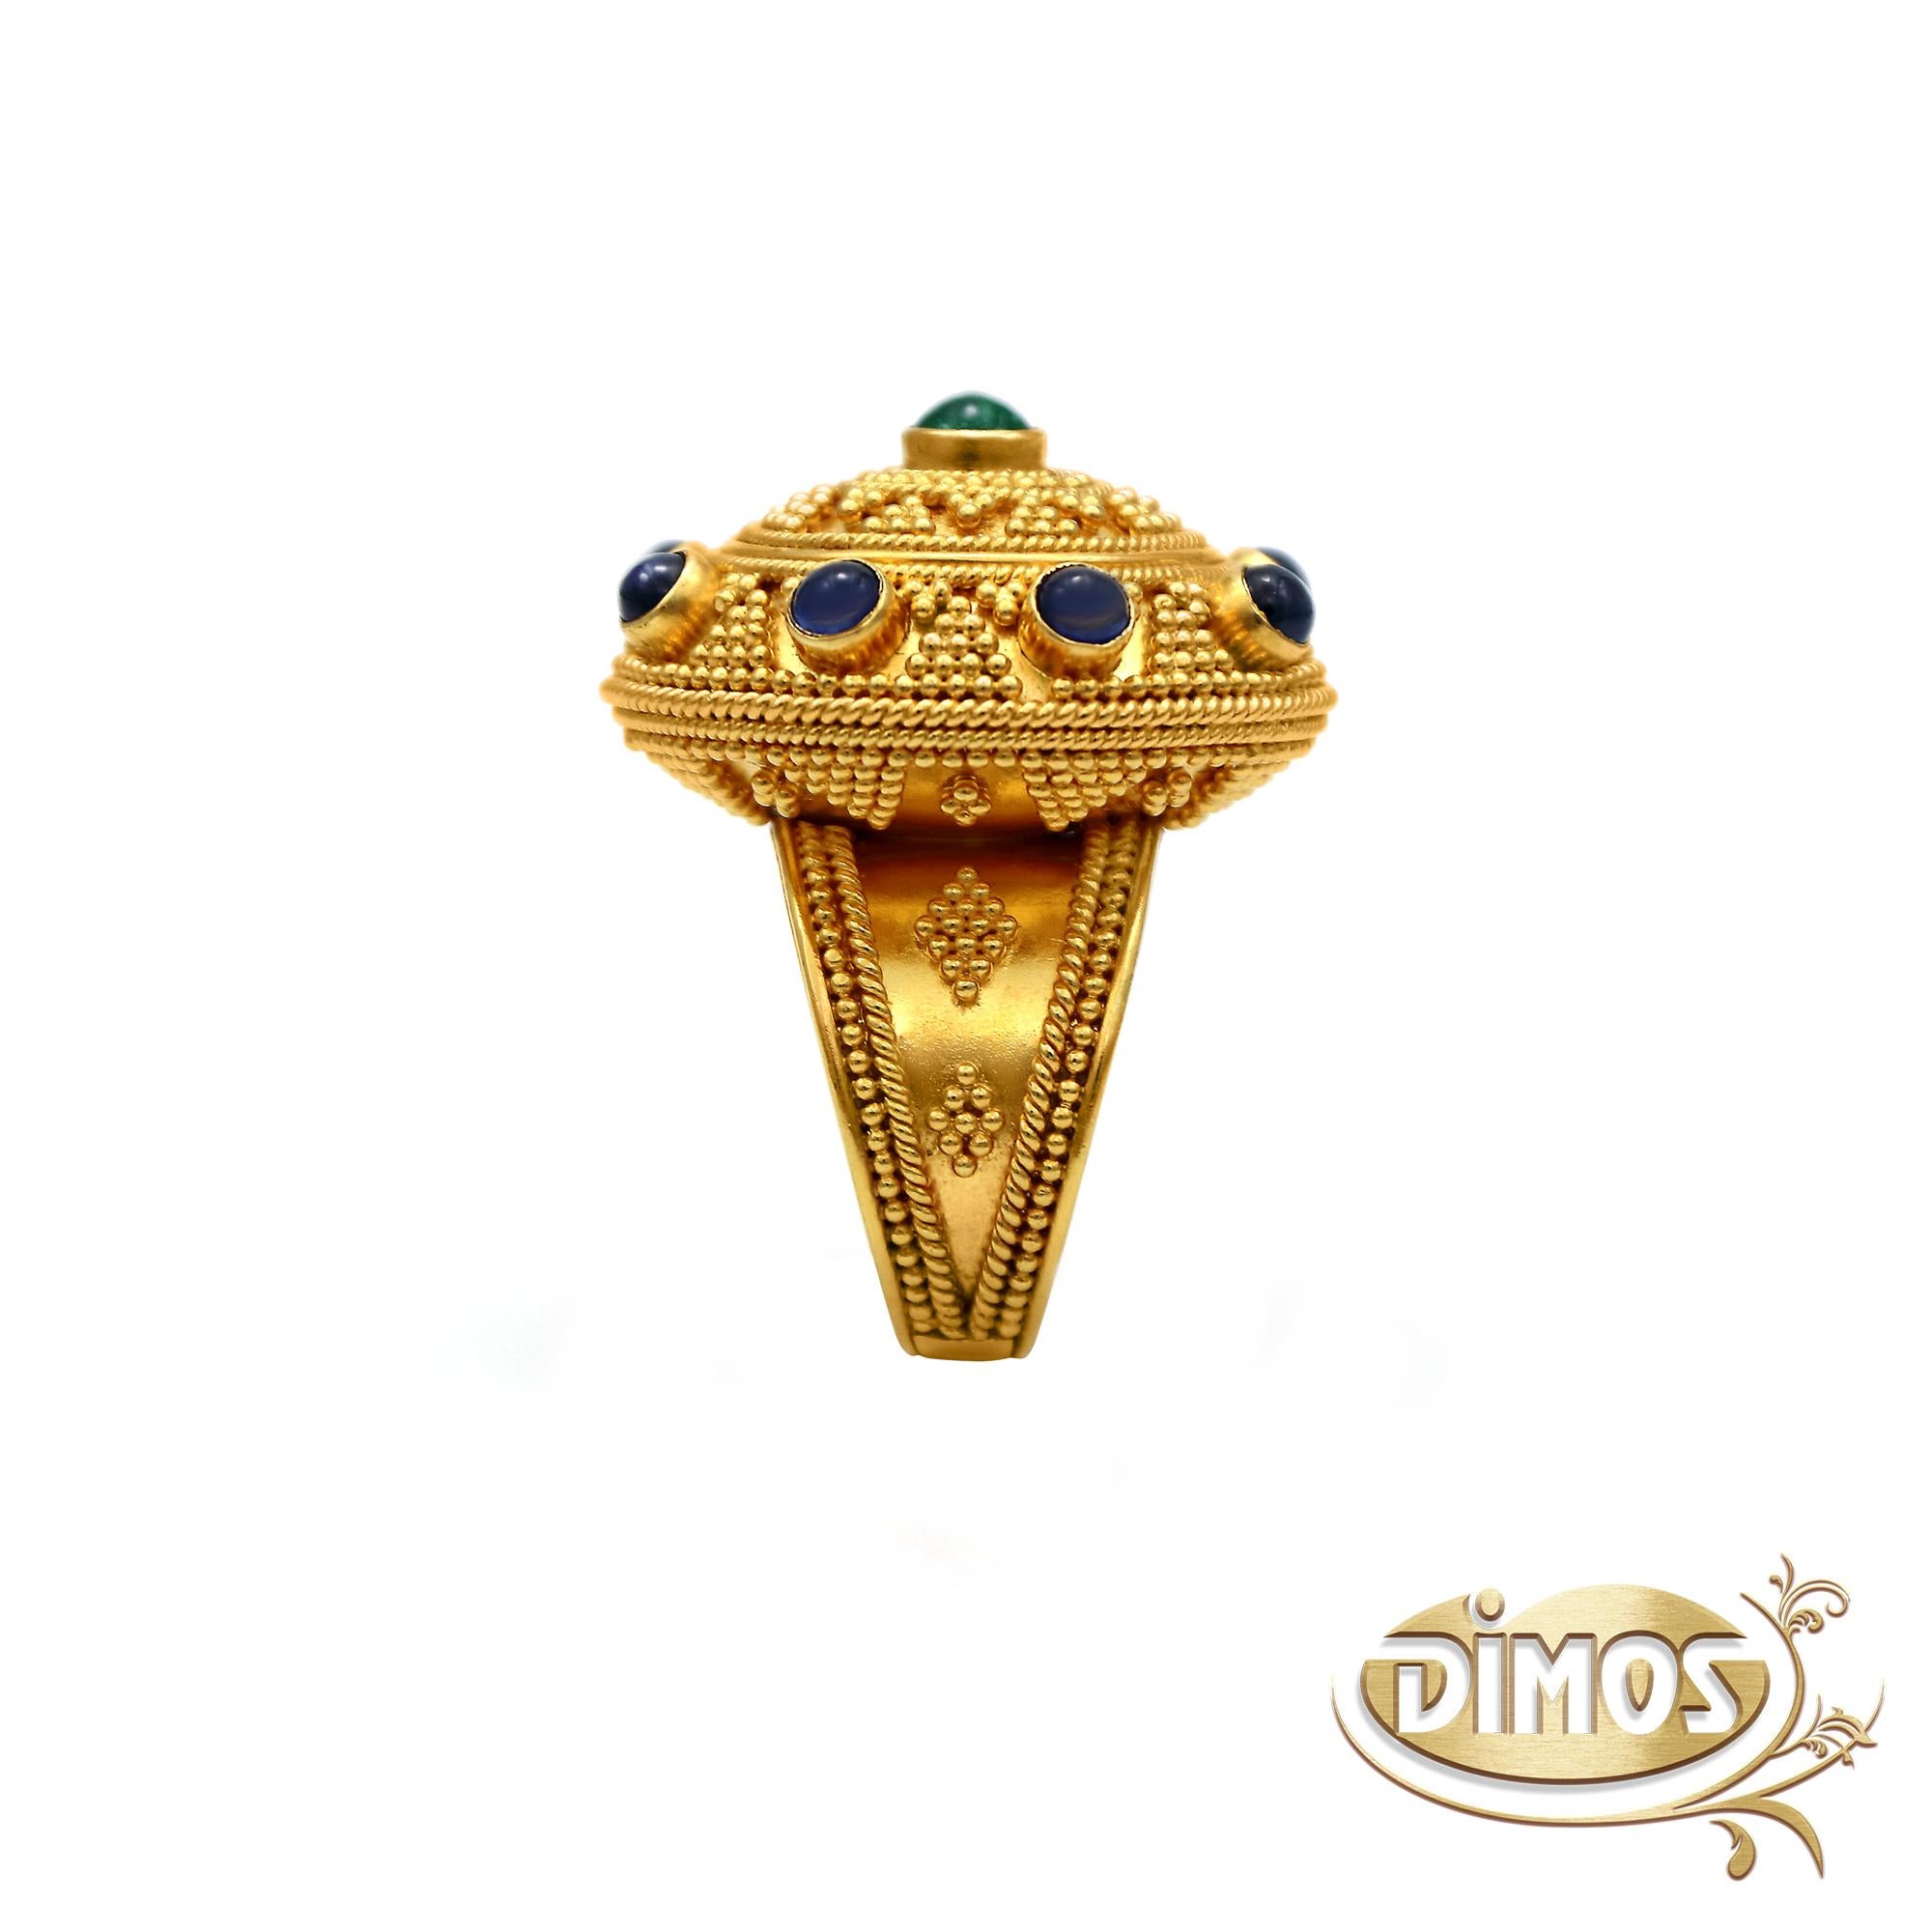 Cabochon Dimos 22k Gold Byzantine Dome Cocktail Ring  For Sale